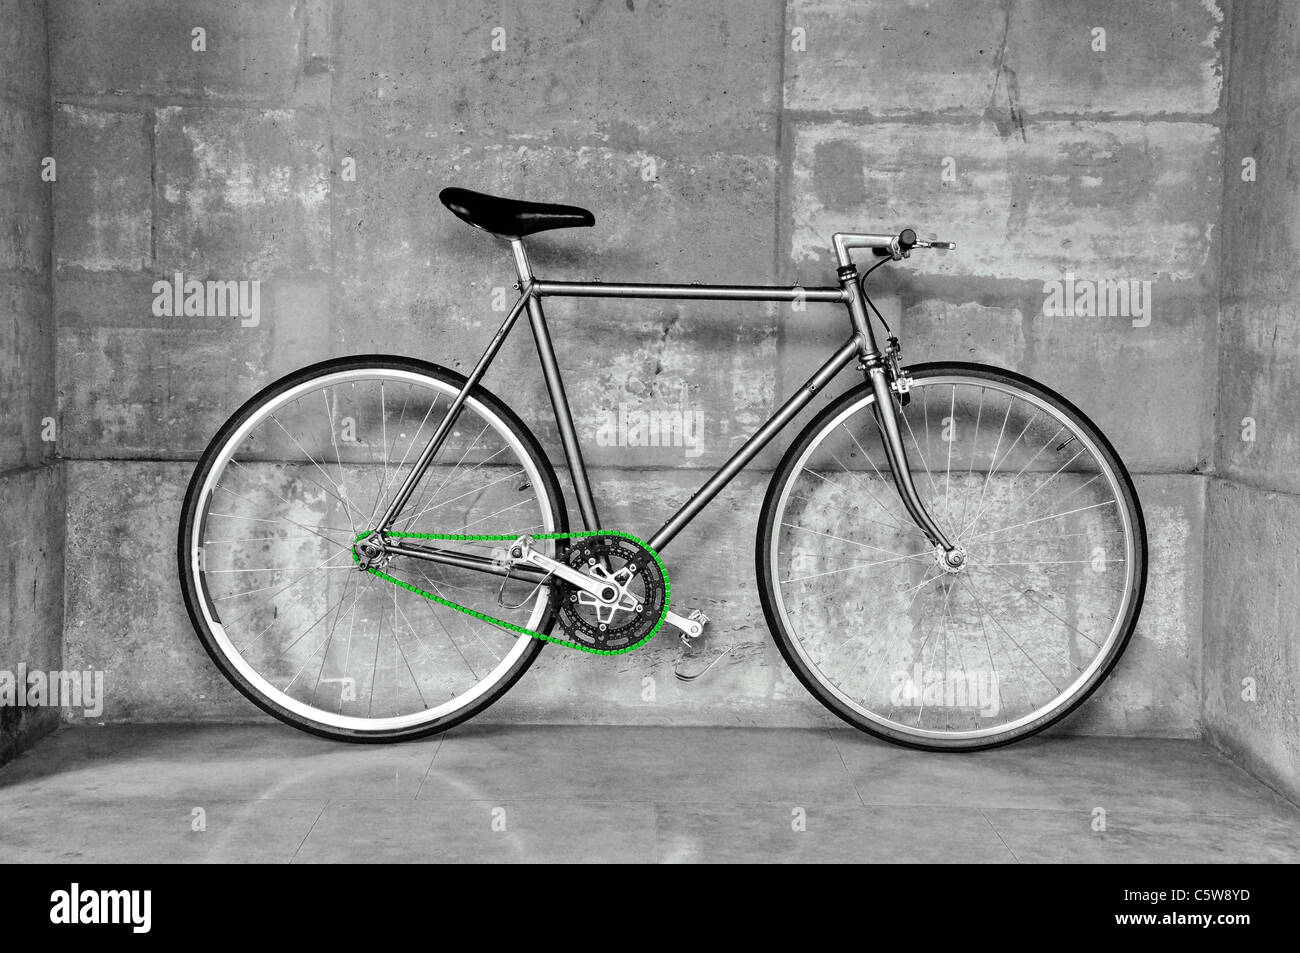 A fixed gear bicycle, also called fixie, with a green chain, ecology concept Stock Photo